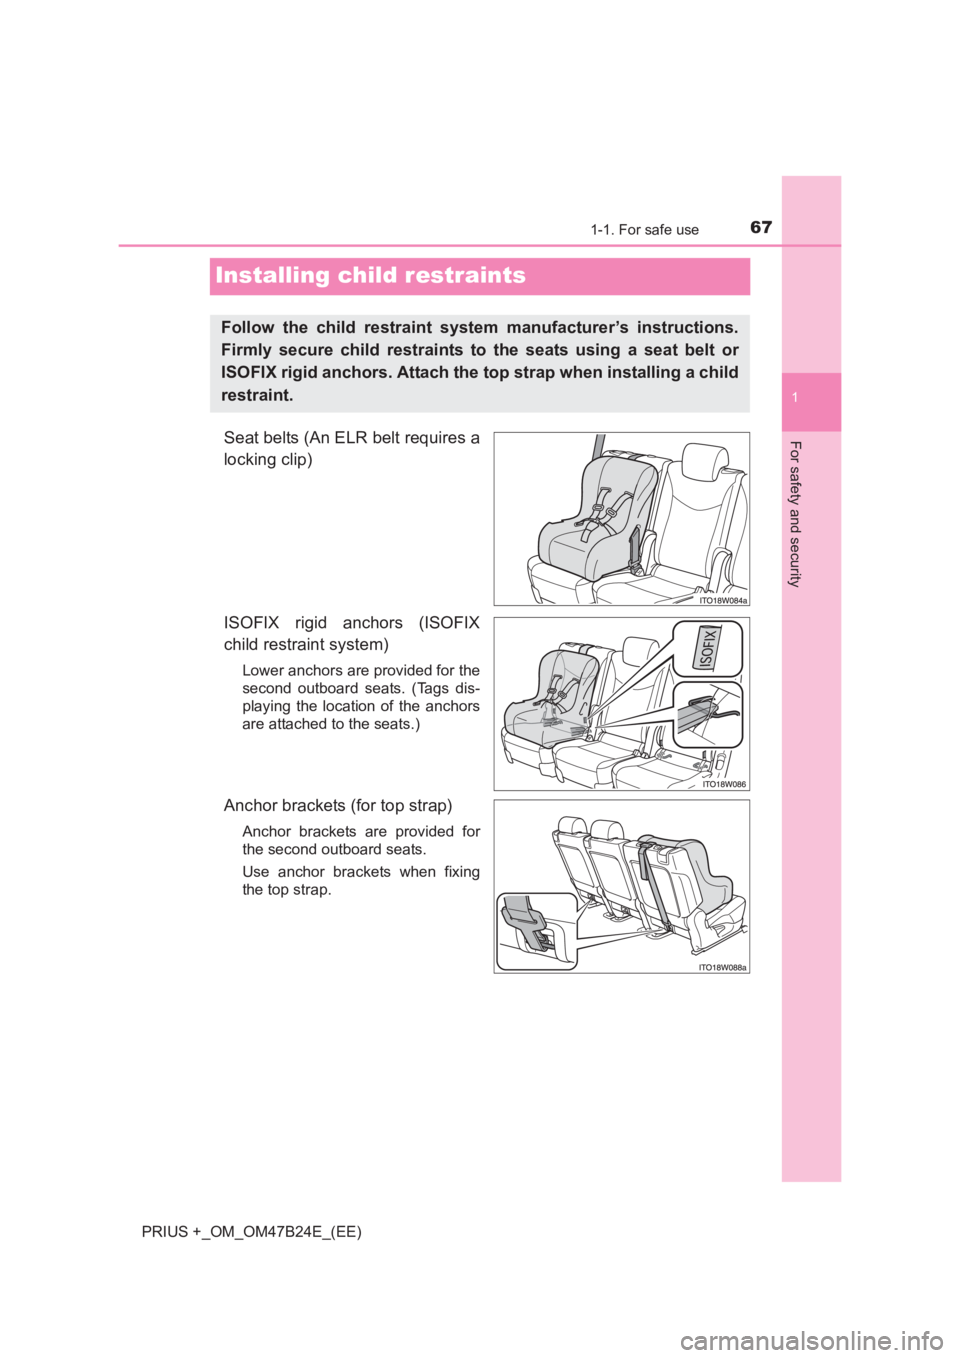 TOYOTA PRIUS PLUS 2017 Owners Manual 671-1. For safe use
1
For safety and security
PRIUS +_OM_OM47B24E_(EE)
Installing child restraints
Seat belts (An ELR belt requires a
locking clip)
ISOFIX rigid anchors (ISOFIX
child restraint system)